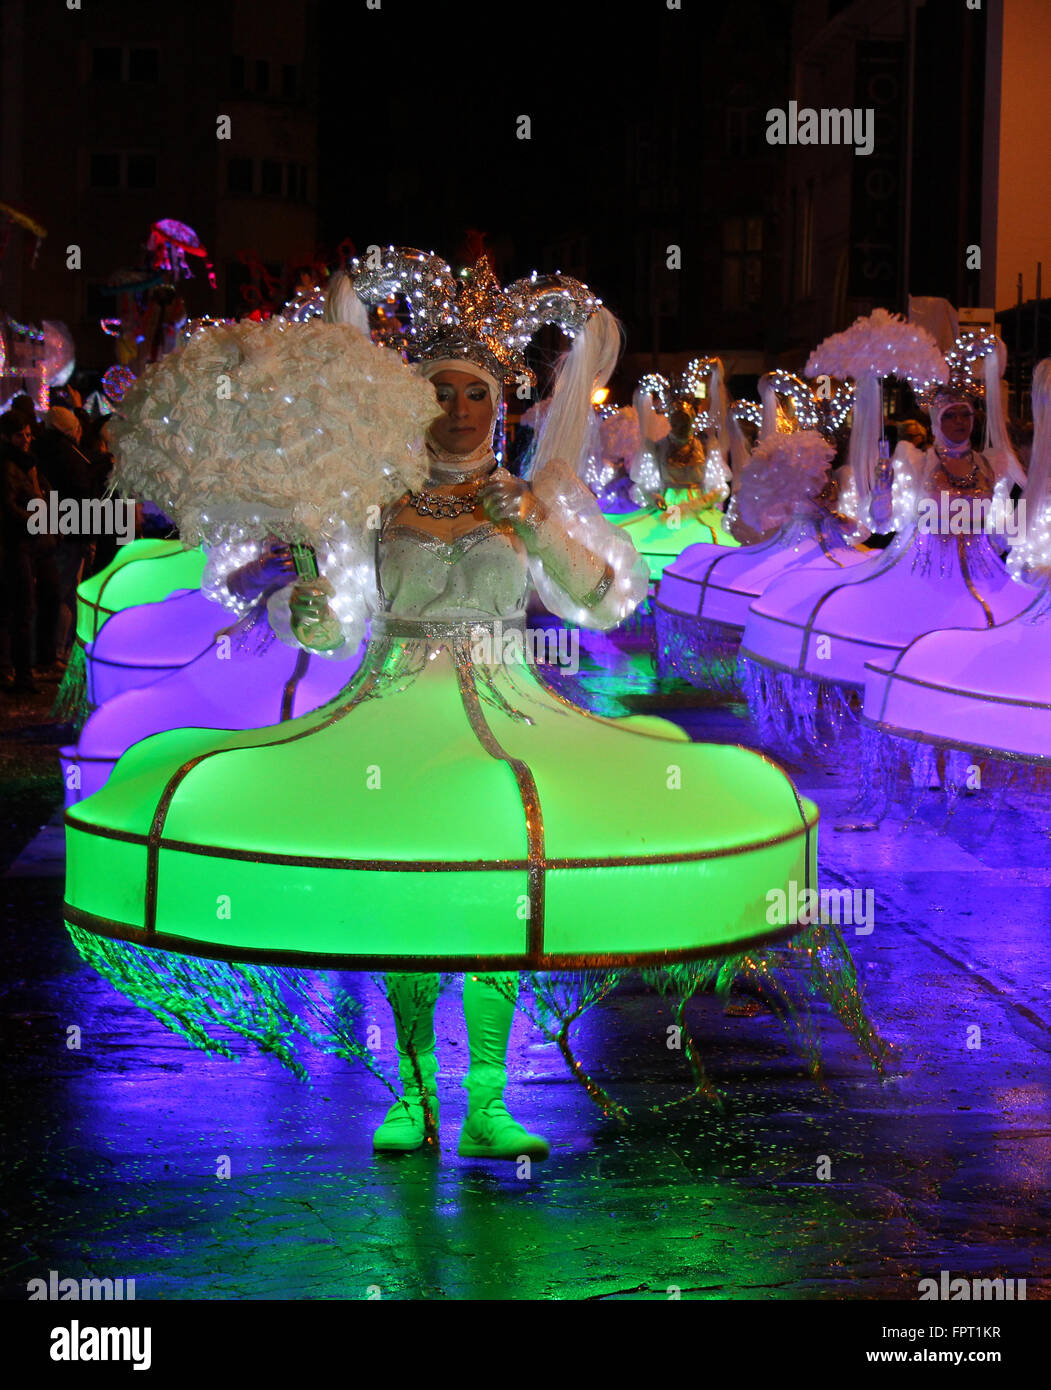 AALST, BELGIUM, FEBRUARY 7 2016: Unknown participants in illuminated costume during the annual carnival parade in Aalst. Stock Photo